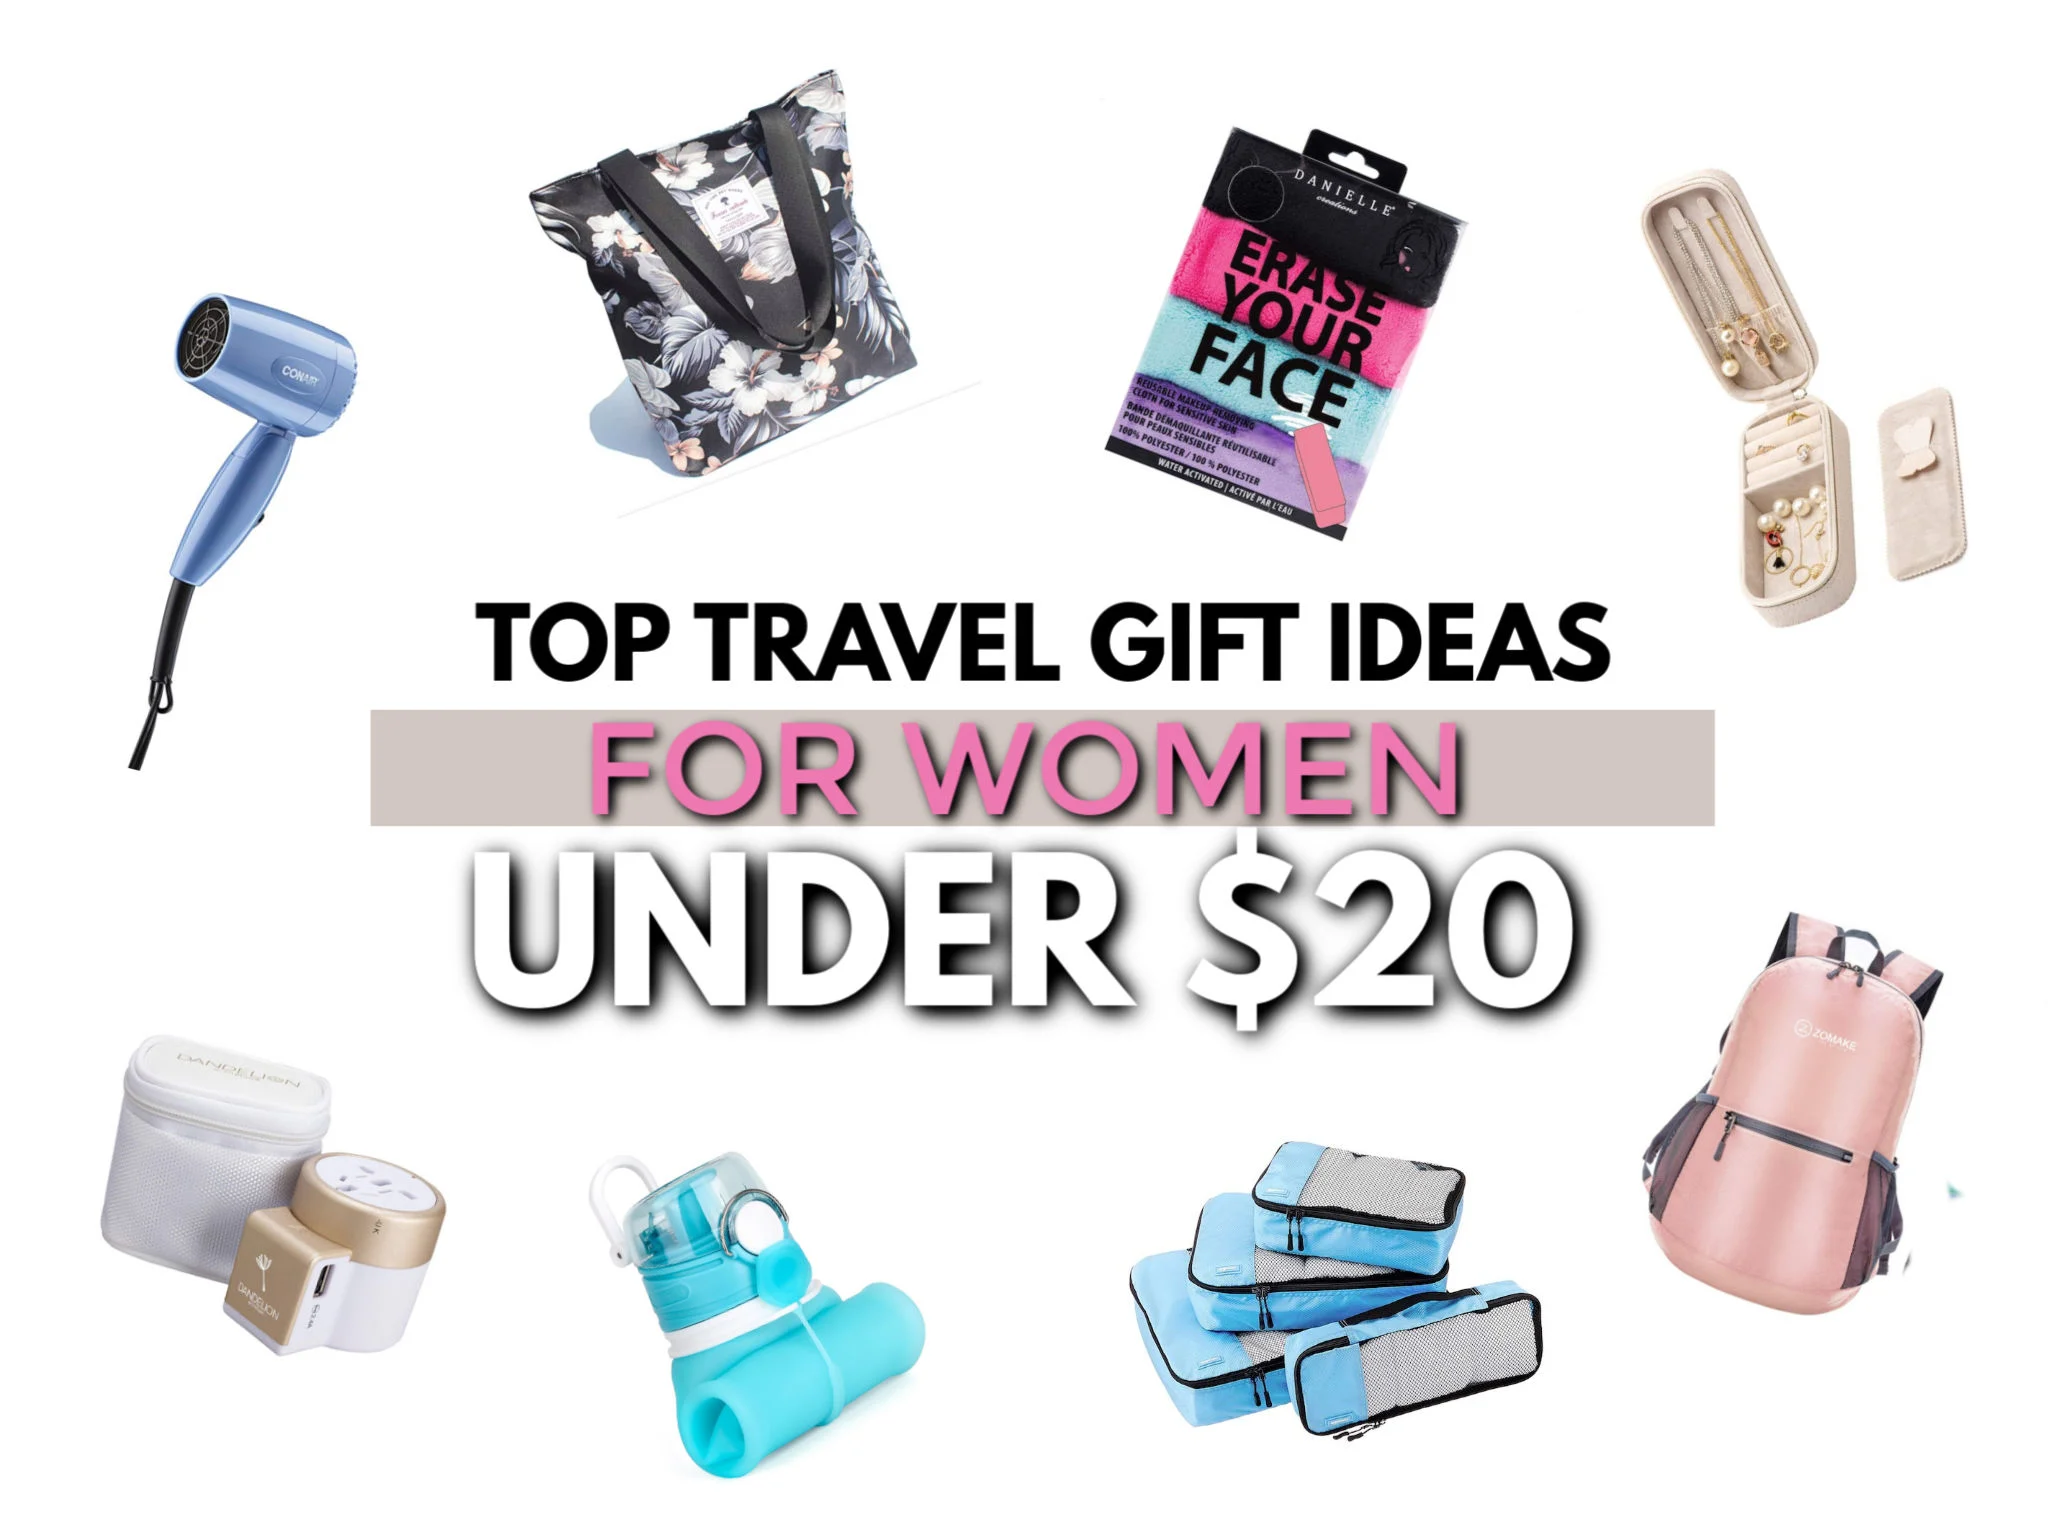 Top travel gift ideas for women under $20